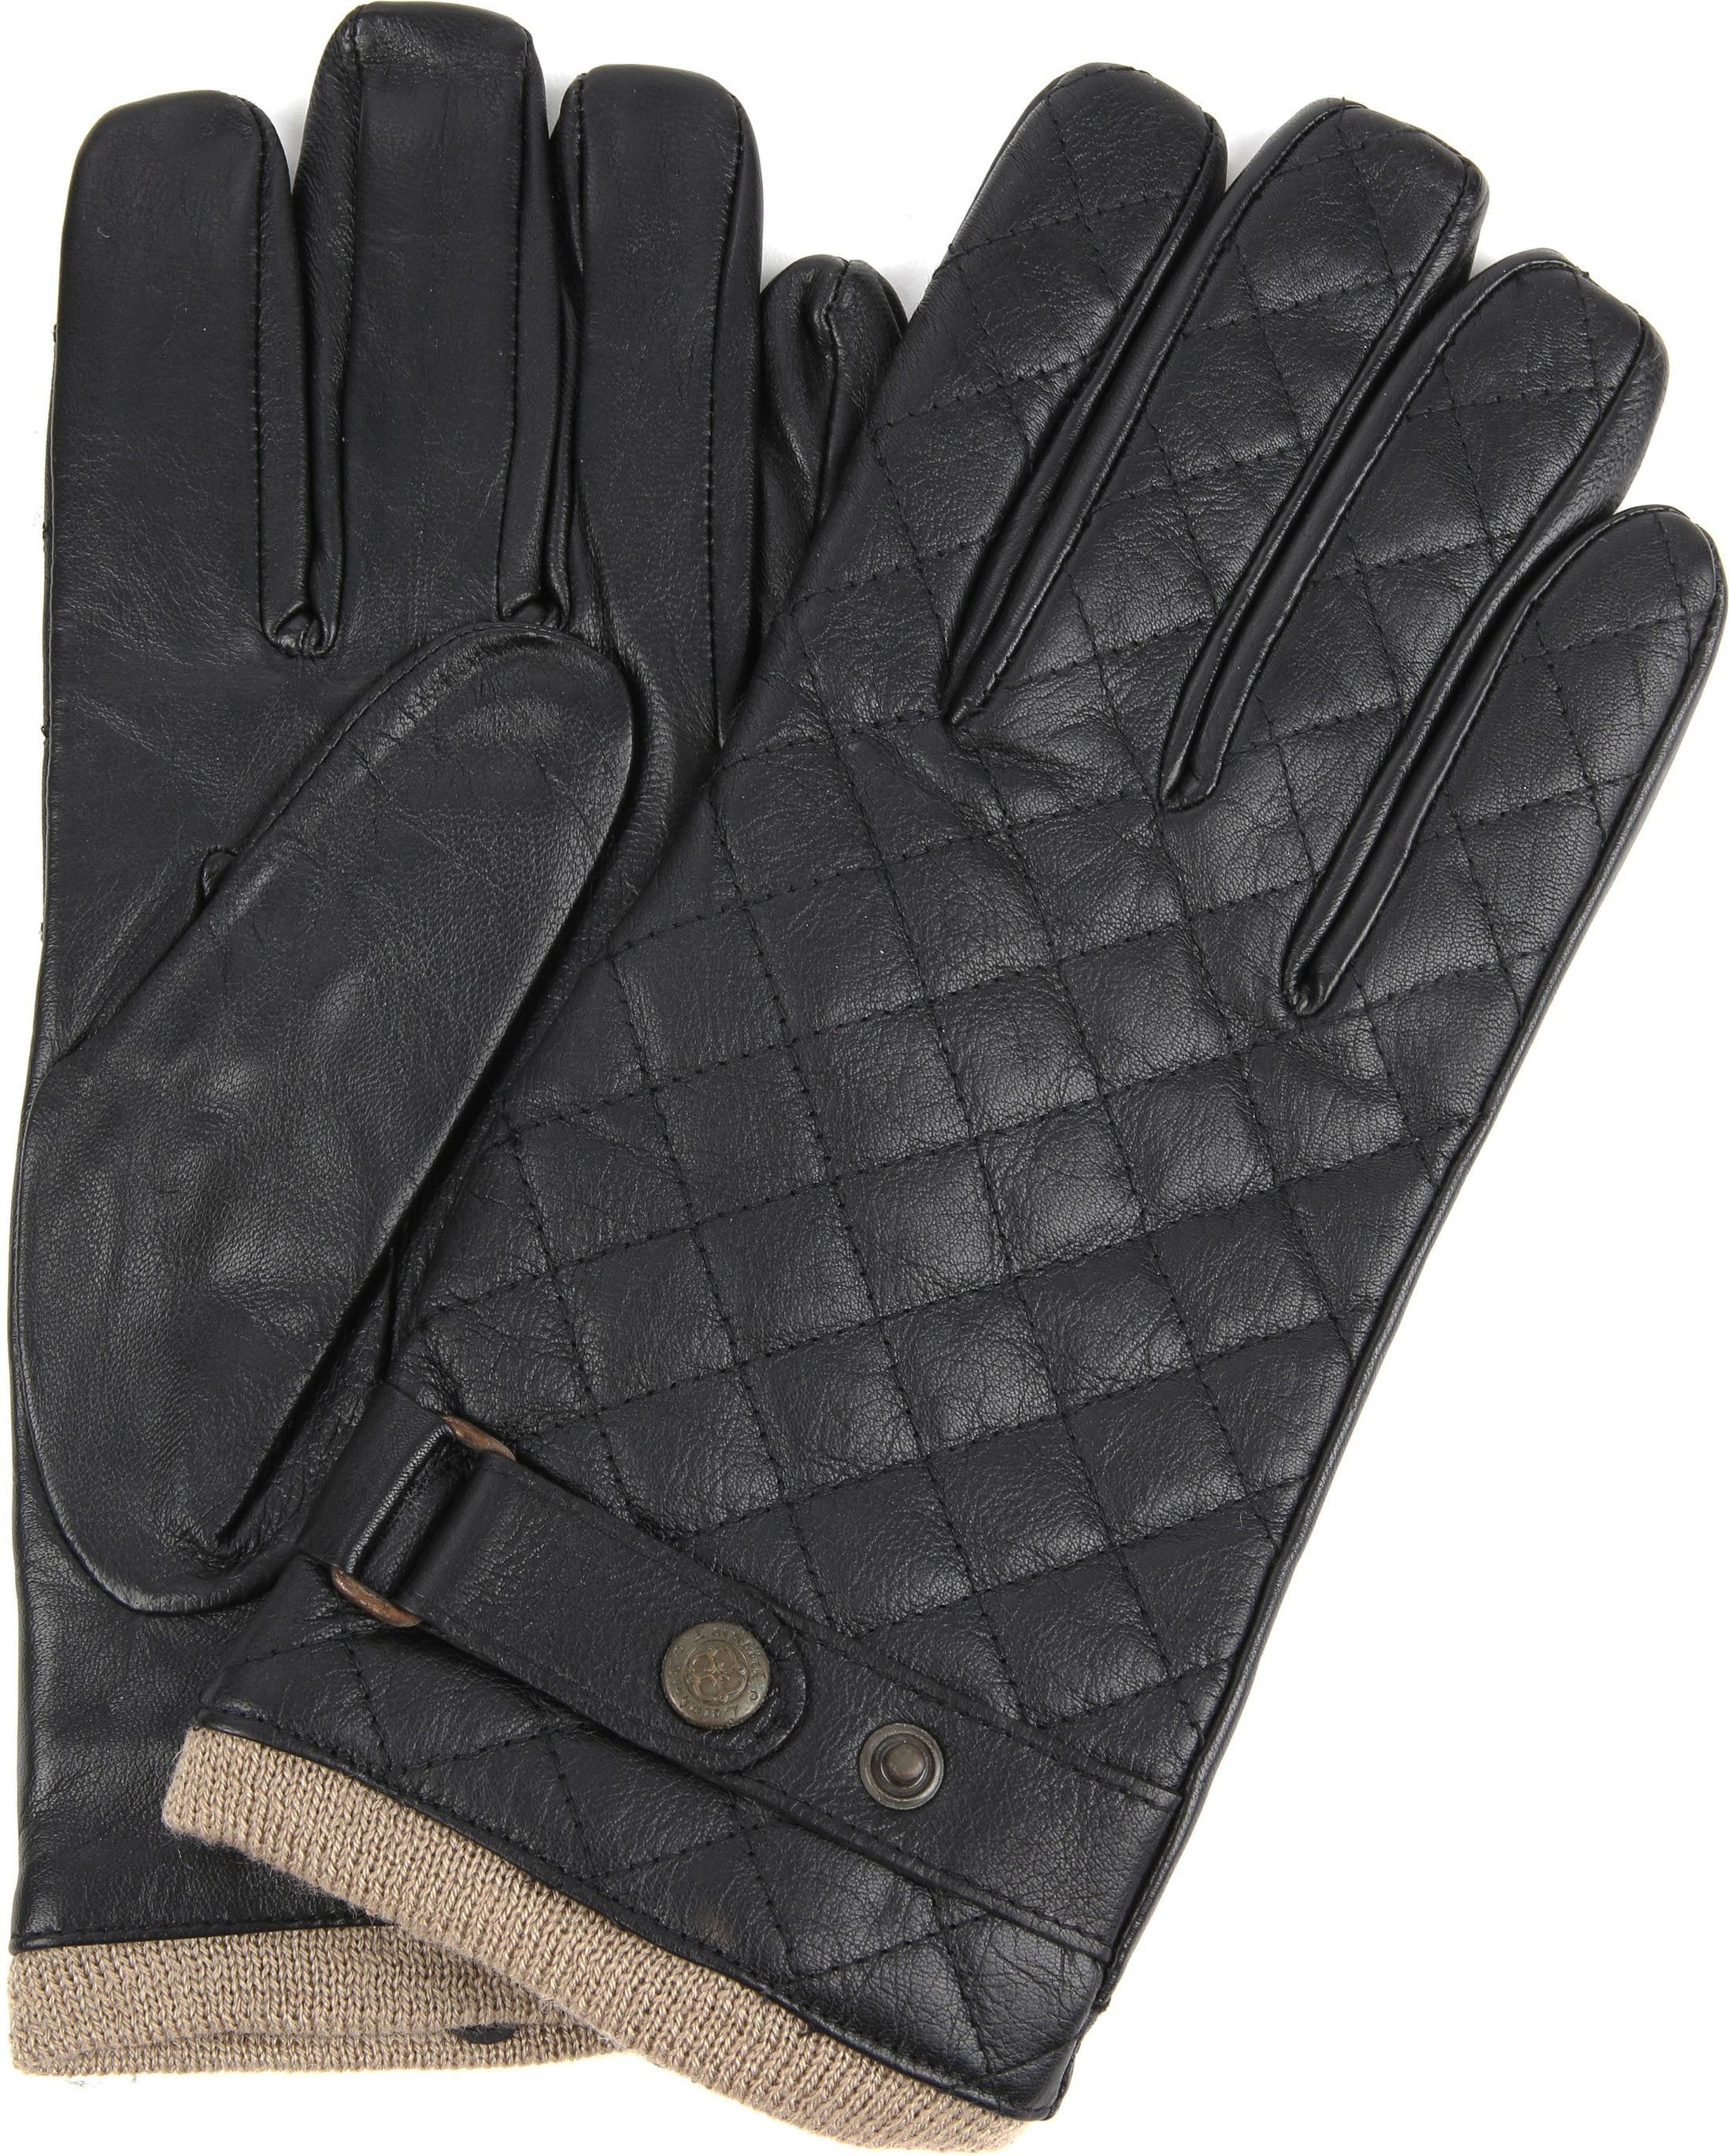 Laimbock Quilted Gloves Blacos Black size 9.5